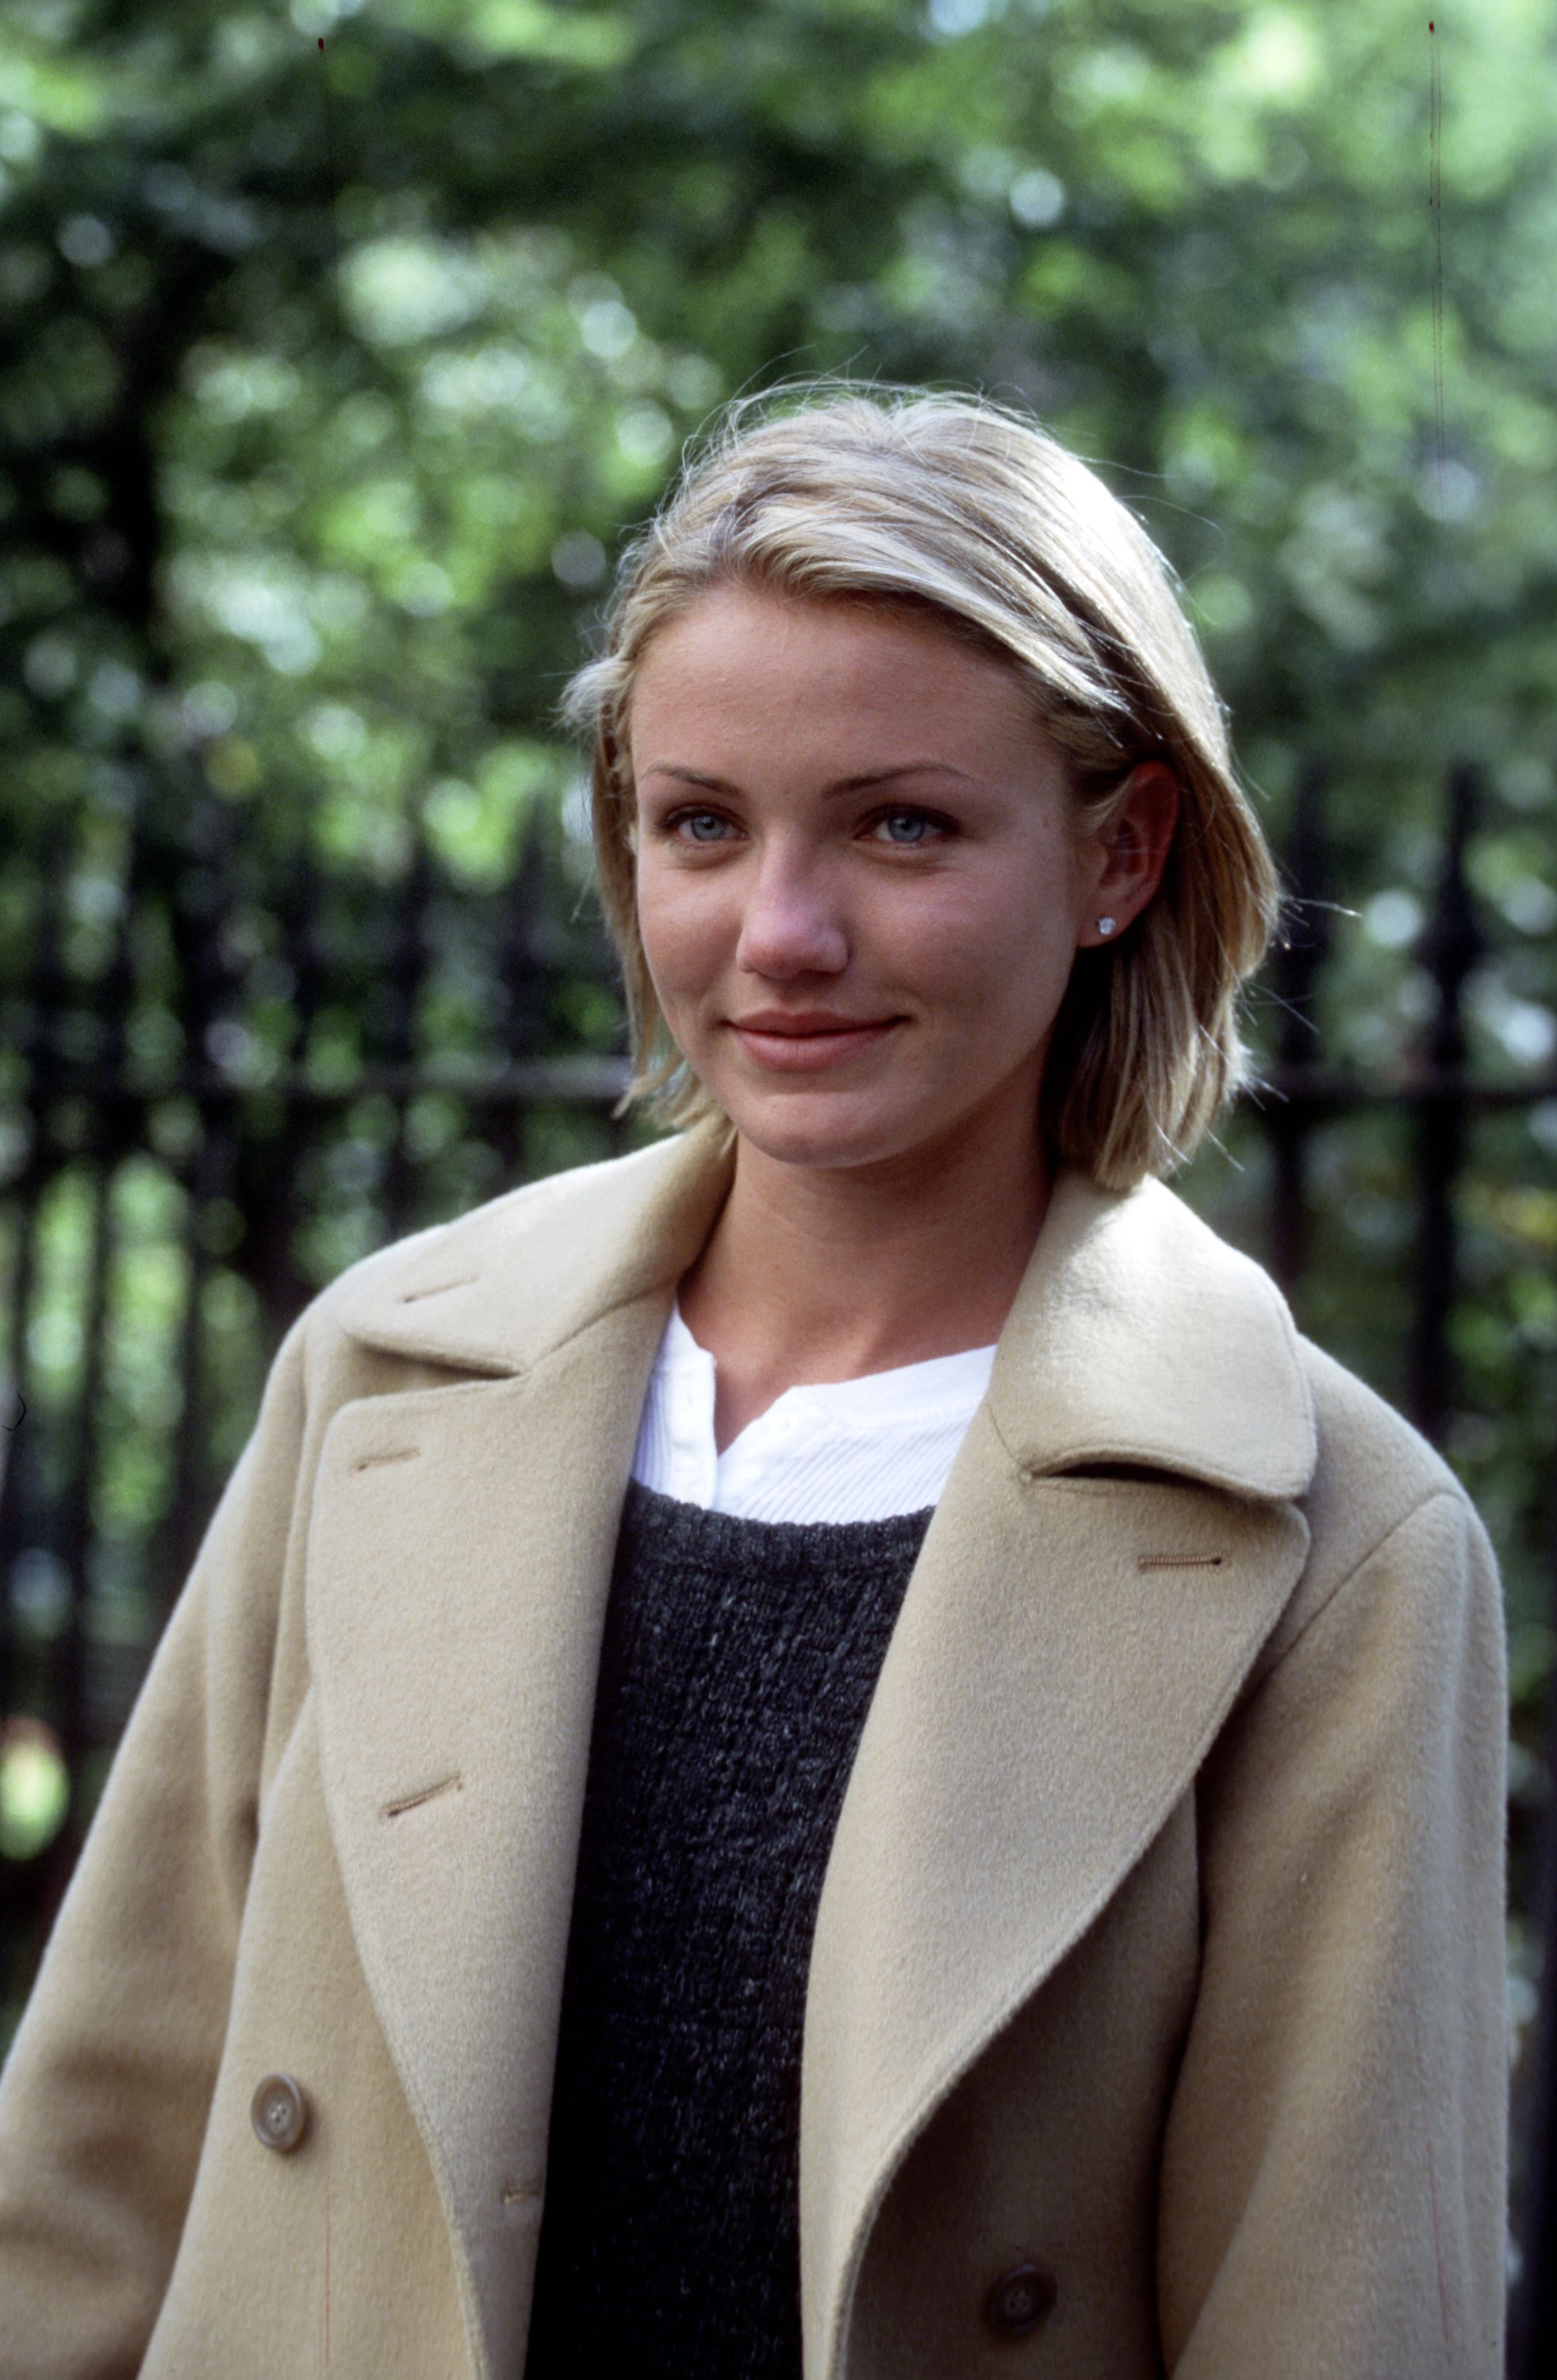 Cameron diaz young pictures